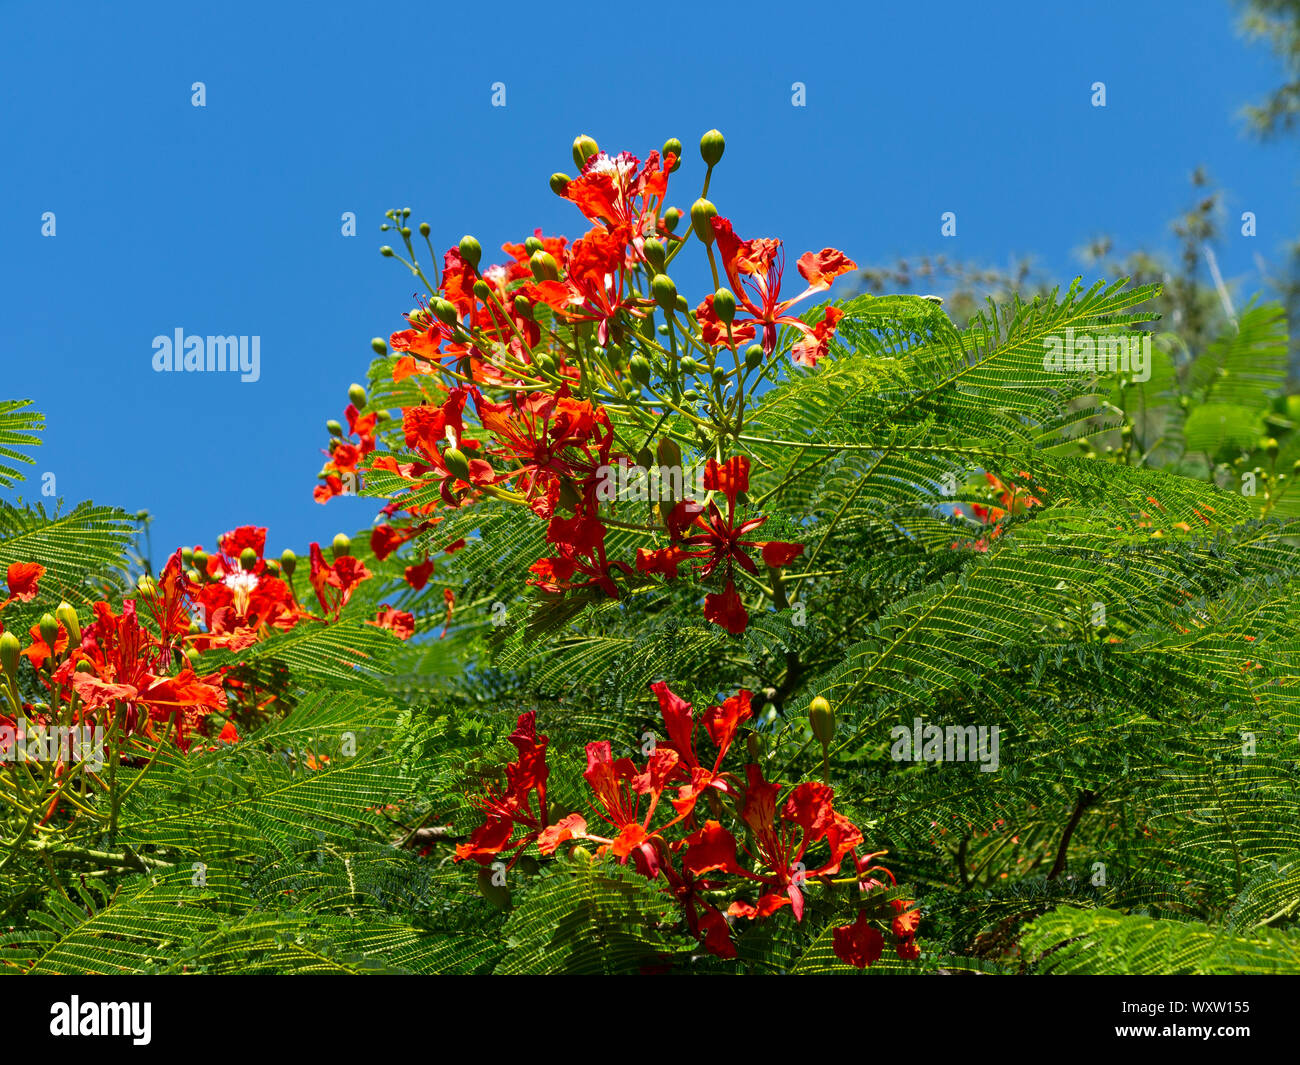 Close up areas of a flame tree in bloom against a bright blue sky, Bermuda Stock Photo